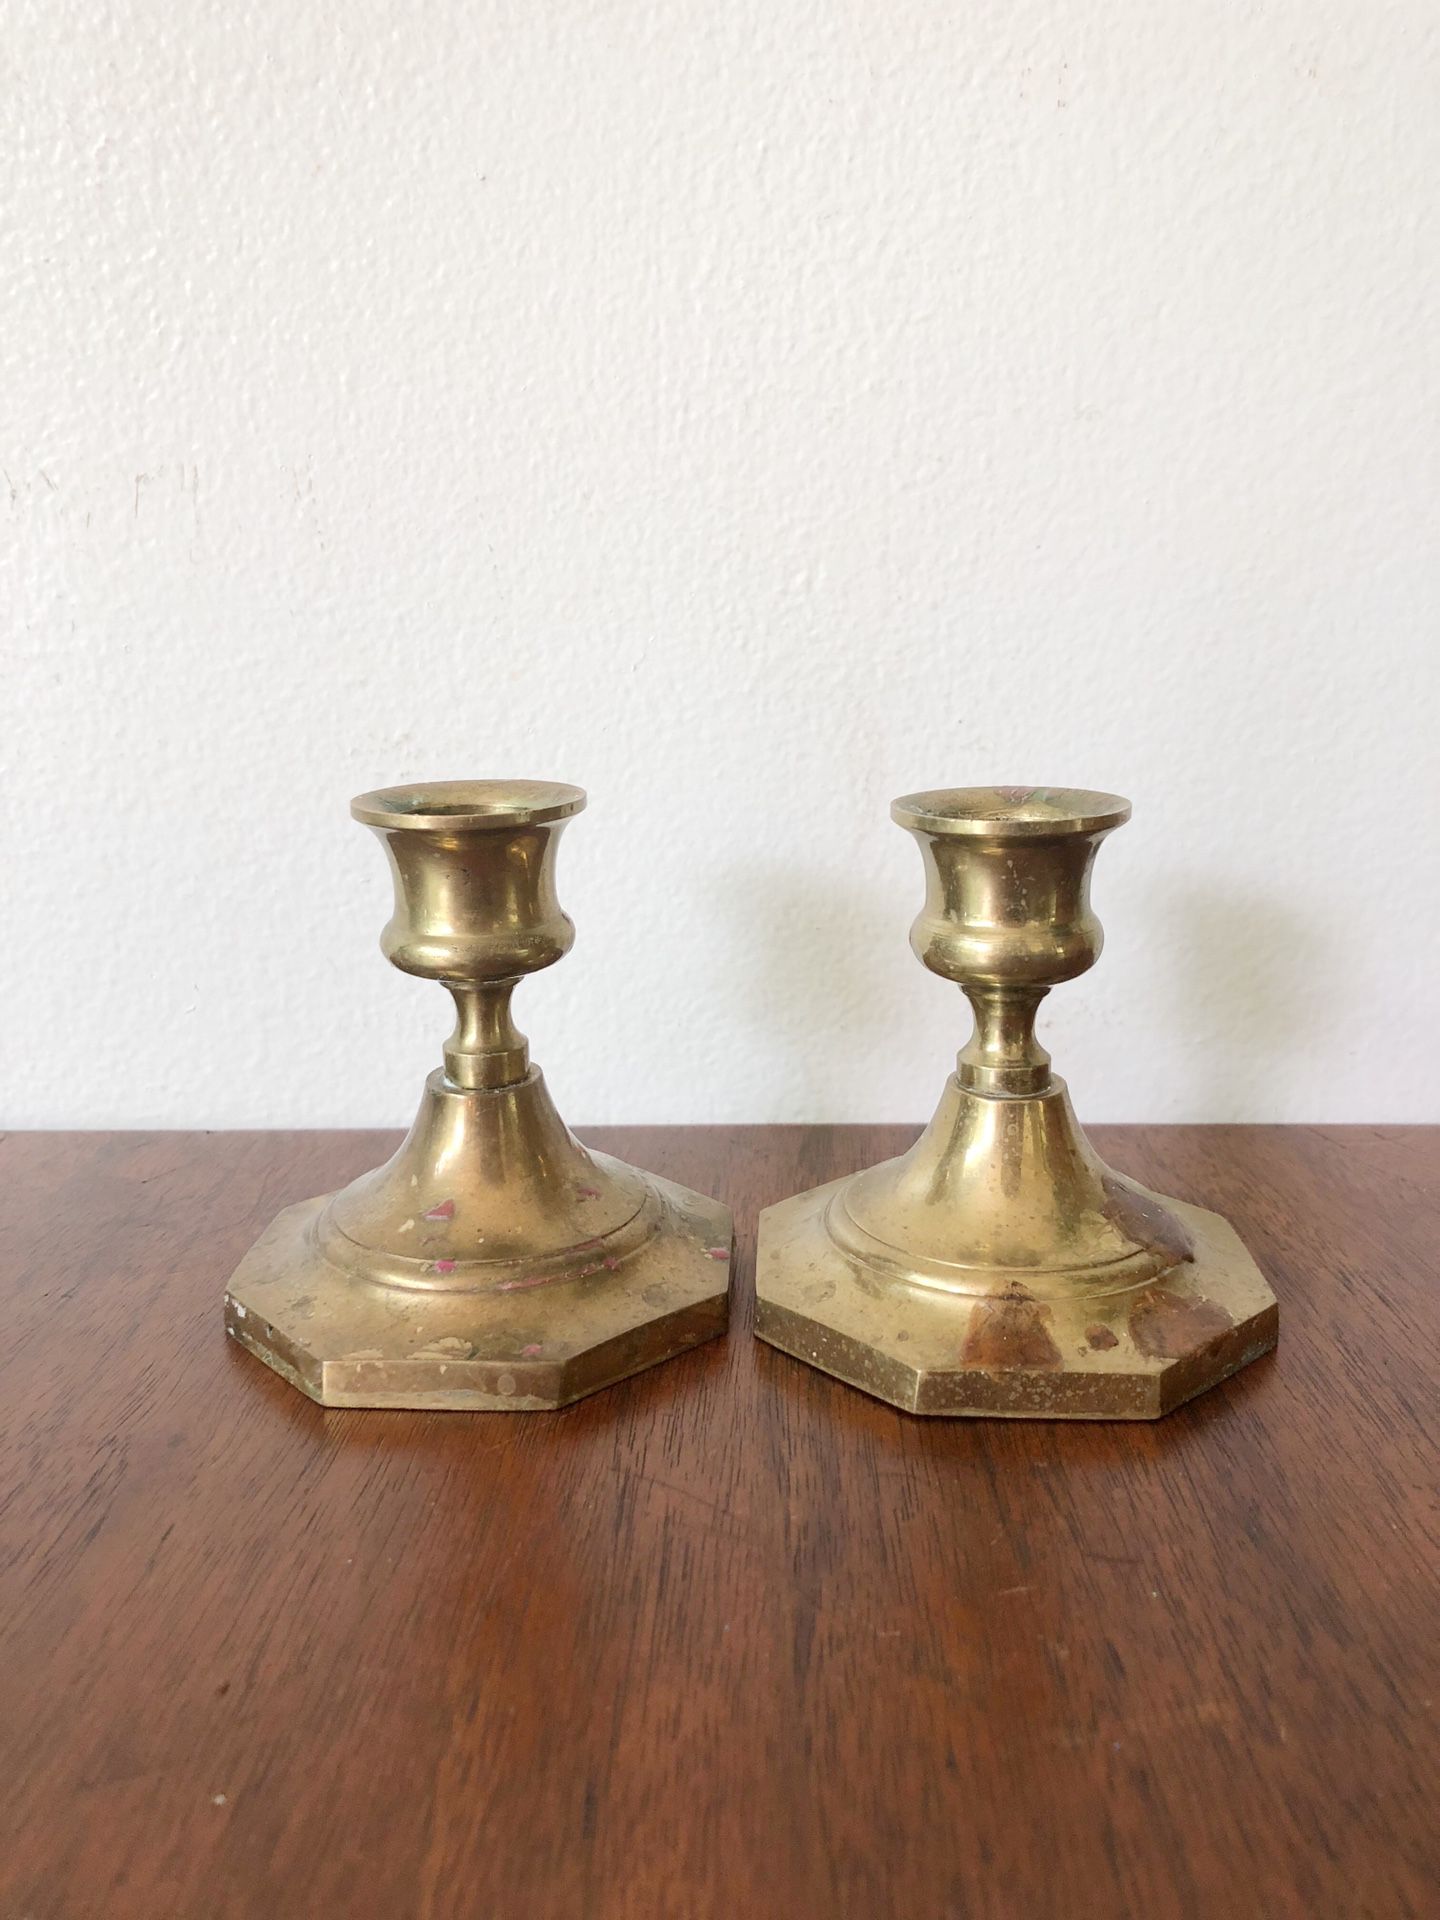 Vintage brass candle holder pair / patina / eclectic boho decor